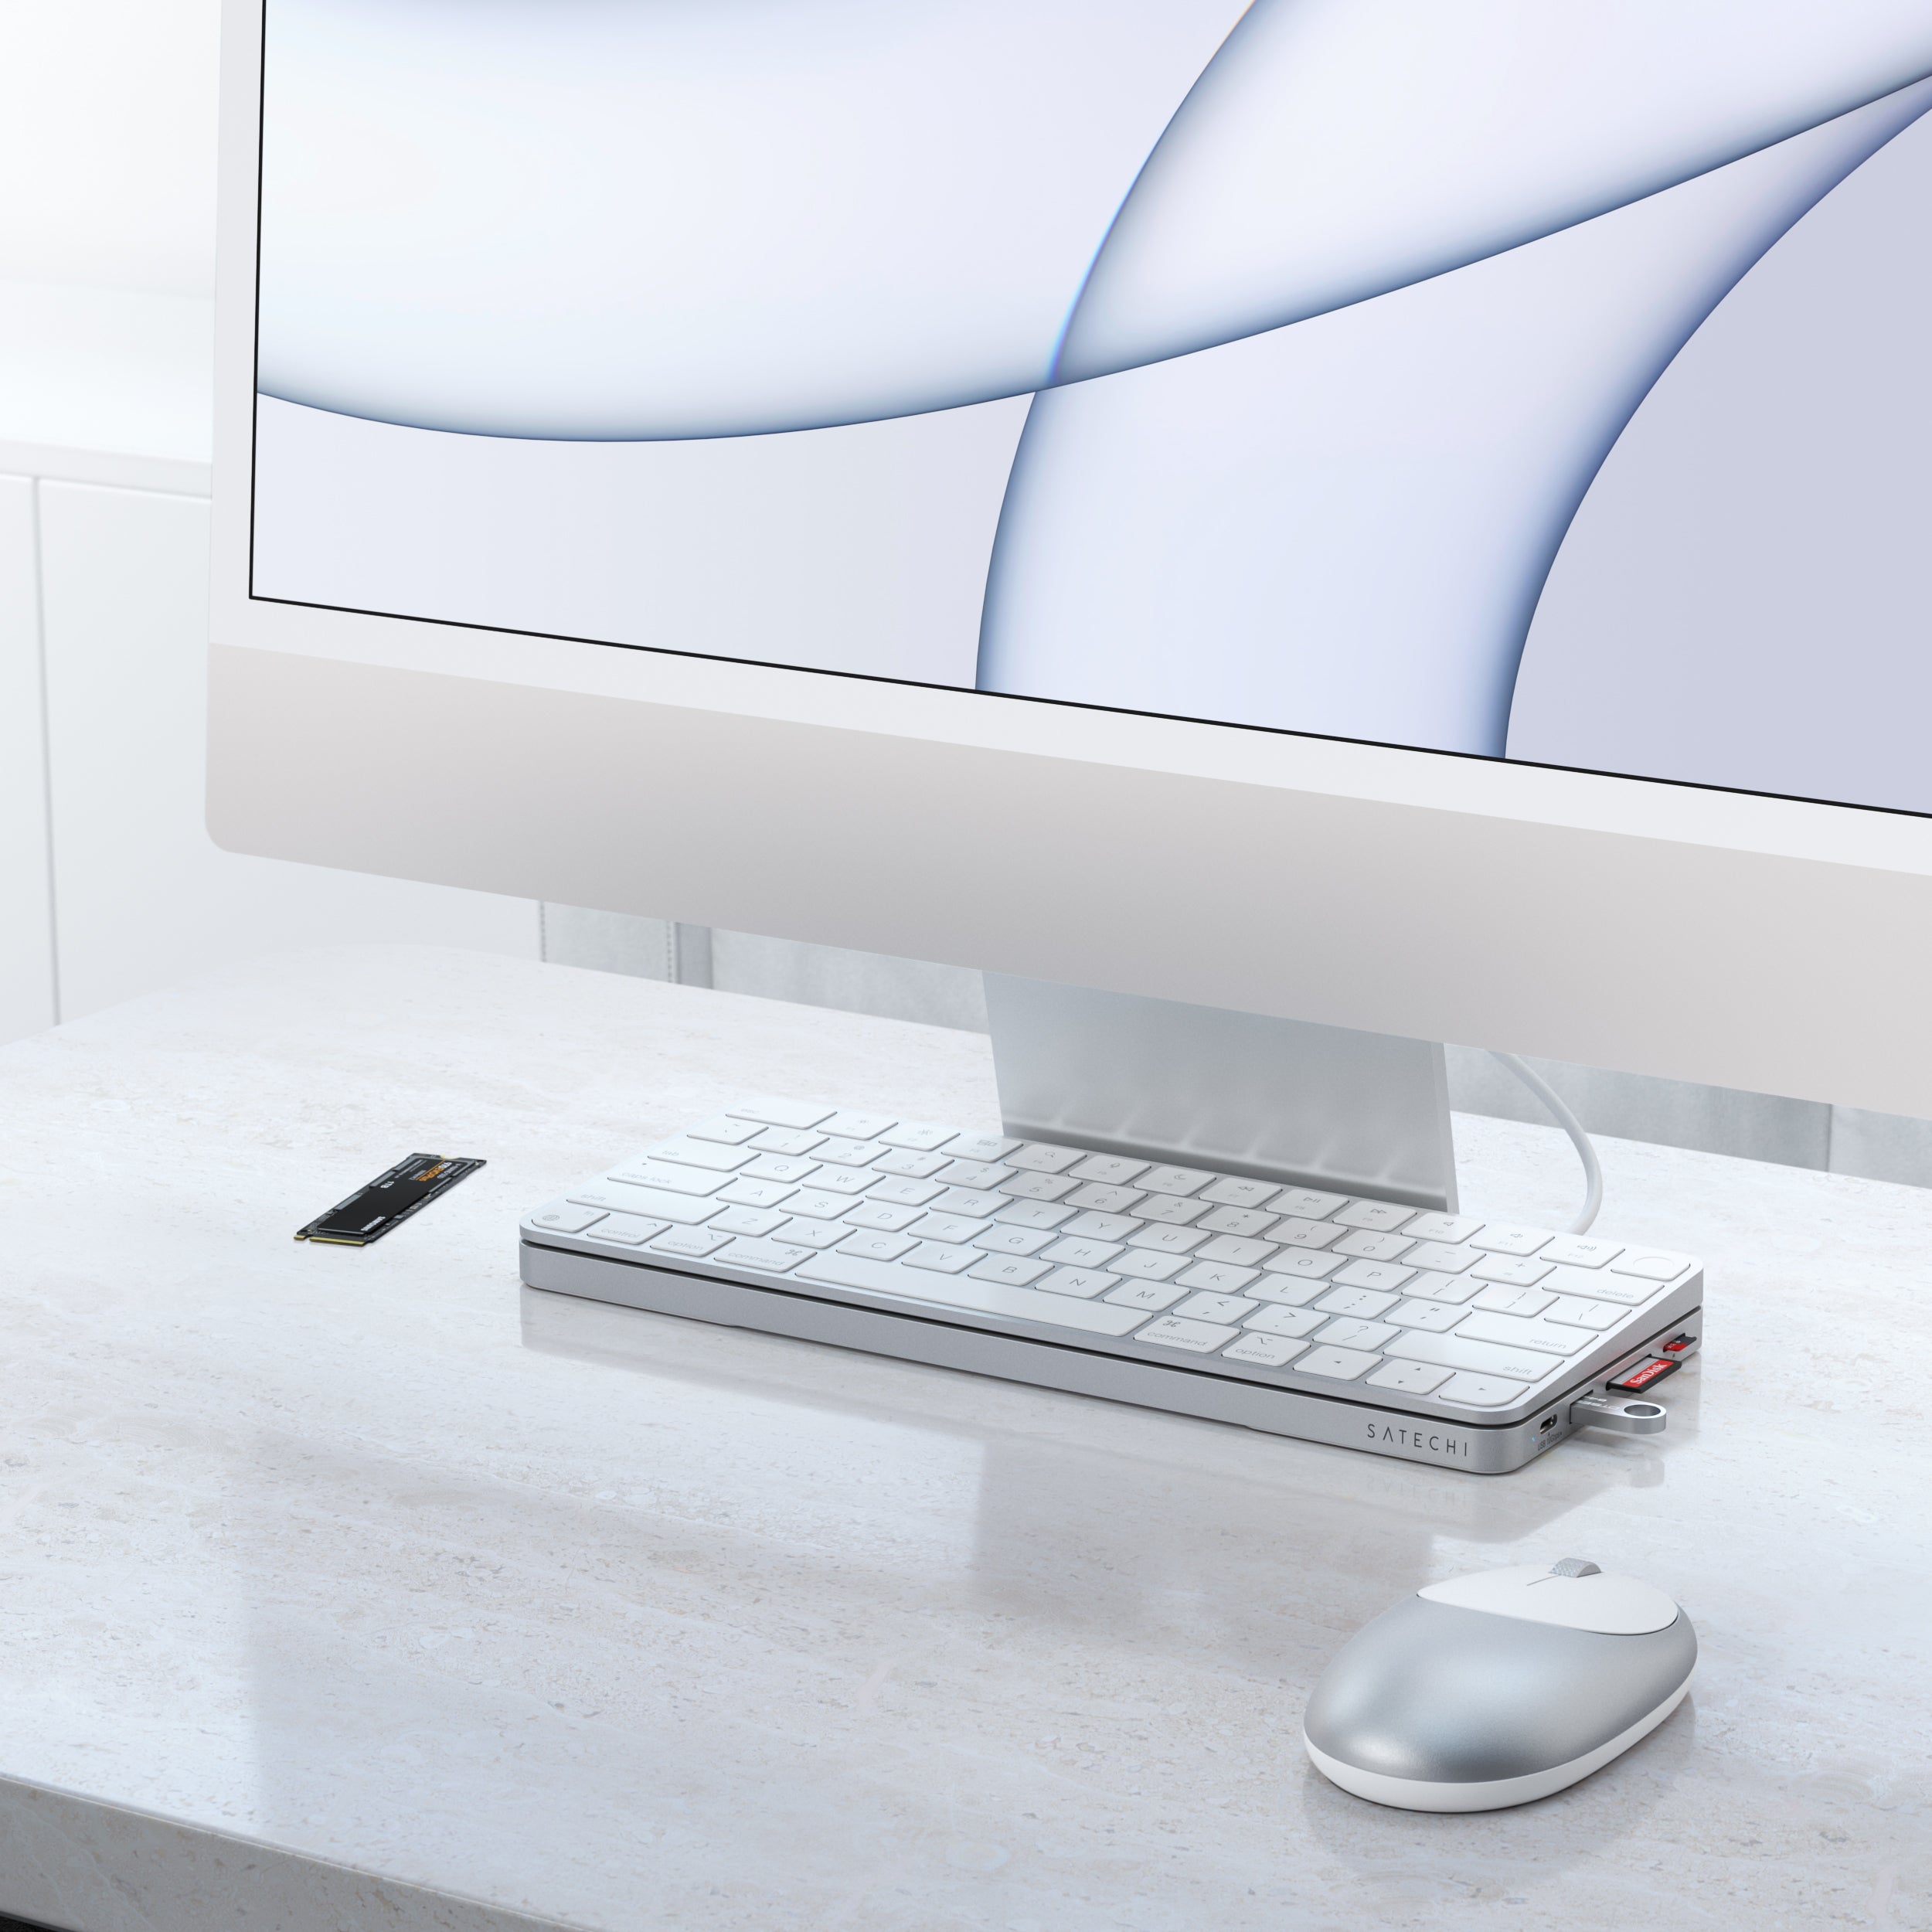 Designed to fit the 2021 iMac (24-inch) exclusively, the Satechi USB-C Slim Dock for 24” iMac provides a built-in enclosure to add external storage to your iMac and convenient access for all your most-loved ports and peripherals. Featuring a 10 Gbps USB-C data port, 10 Gbps USB-A data port, 2 x USB-A 2.0 ports, micro/SD card reader slots, and NVMe Sata Enclosure, the USB-C Slim Dock upgrades your iMac’s functionality while maintaining a sleek aesthetic all with a plug and play design.